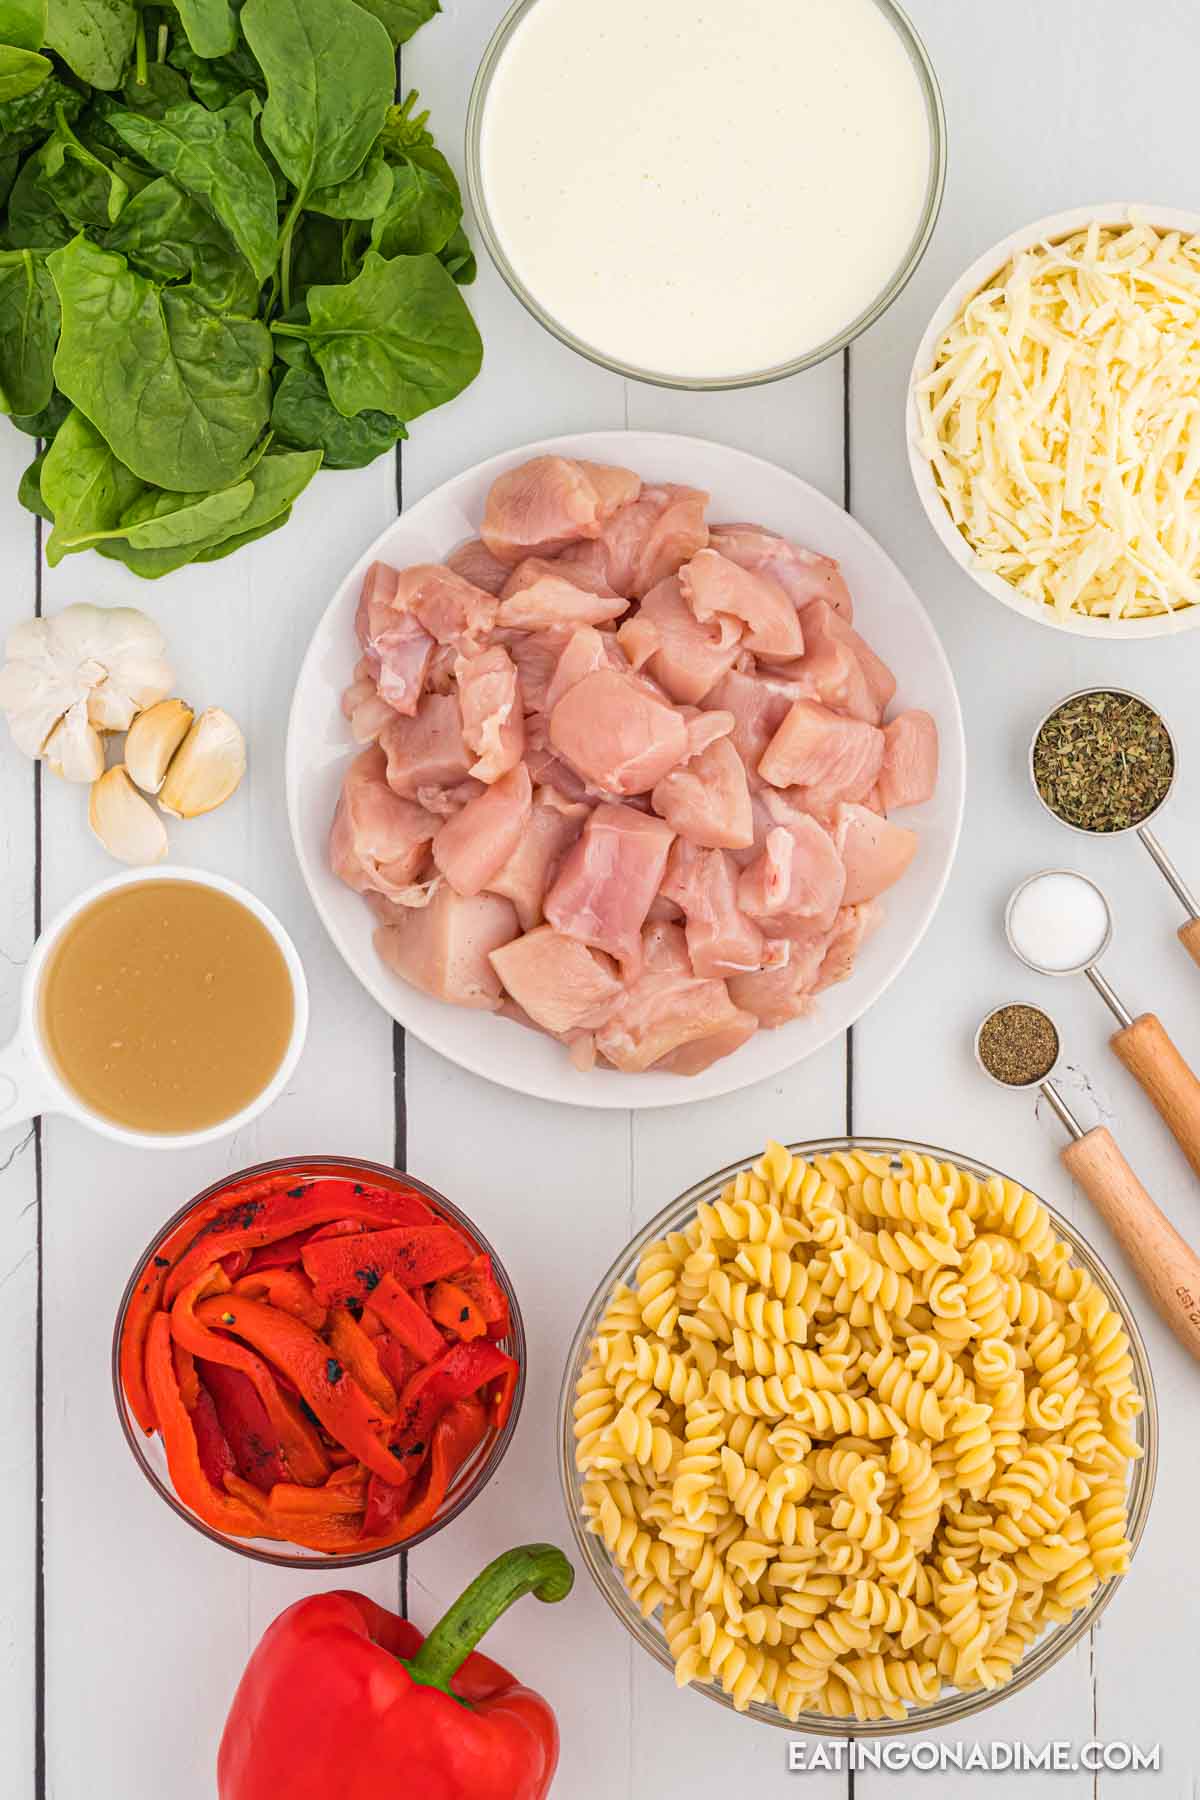 Ingredients needed - chicken, roasted red peppers, minced garlic, dried basil, salt and pepper, chicken broth, fresh spinach, heavy cream, rotini mozzarella cheese